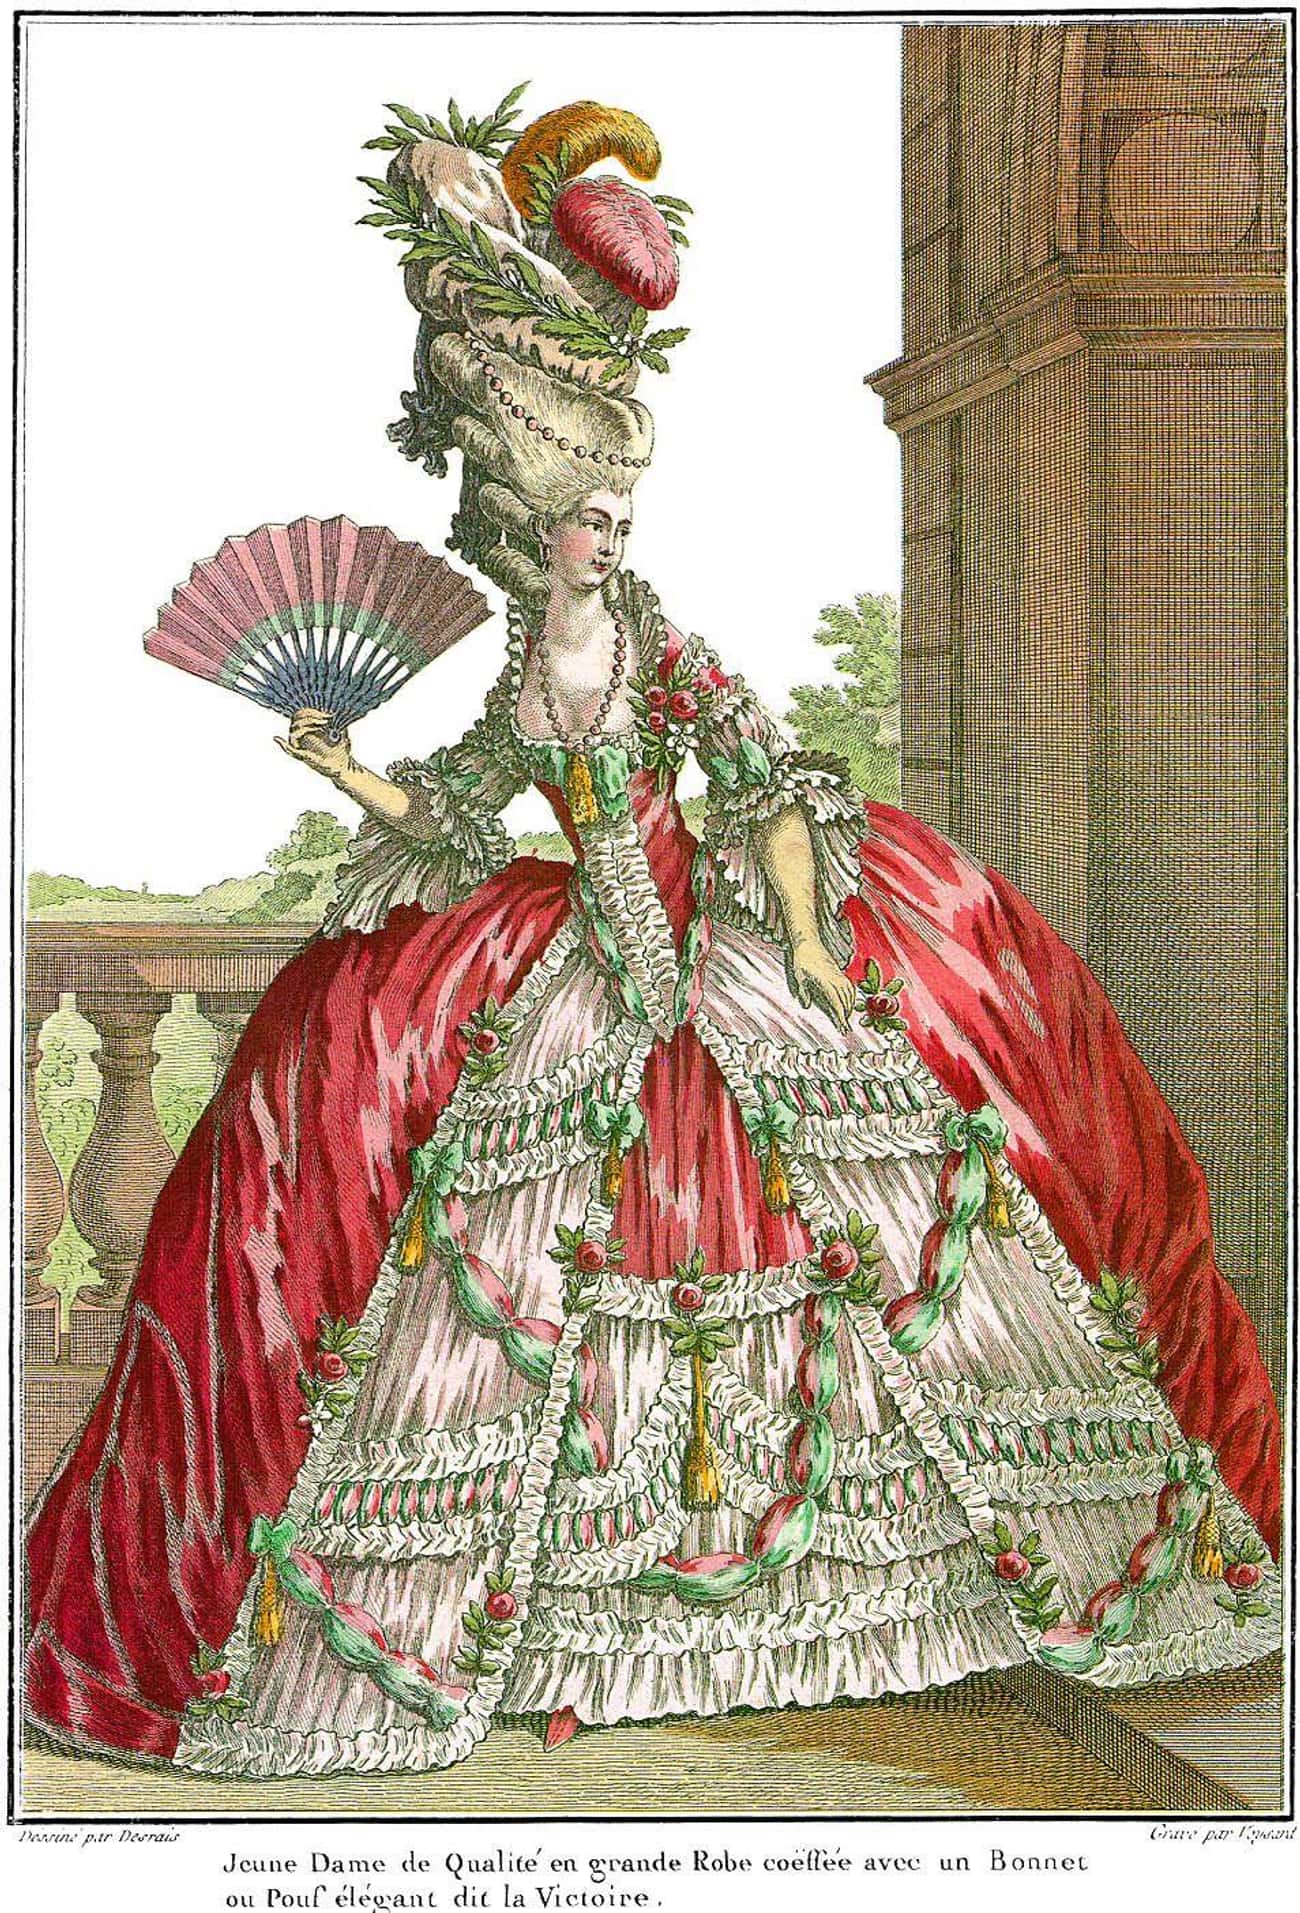 Court Dresses Were So Heavy That Women Practiced Moving In Them So They Didn't Topple Over